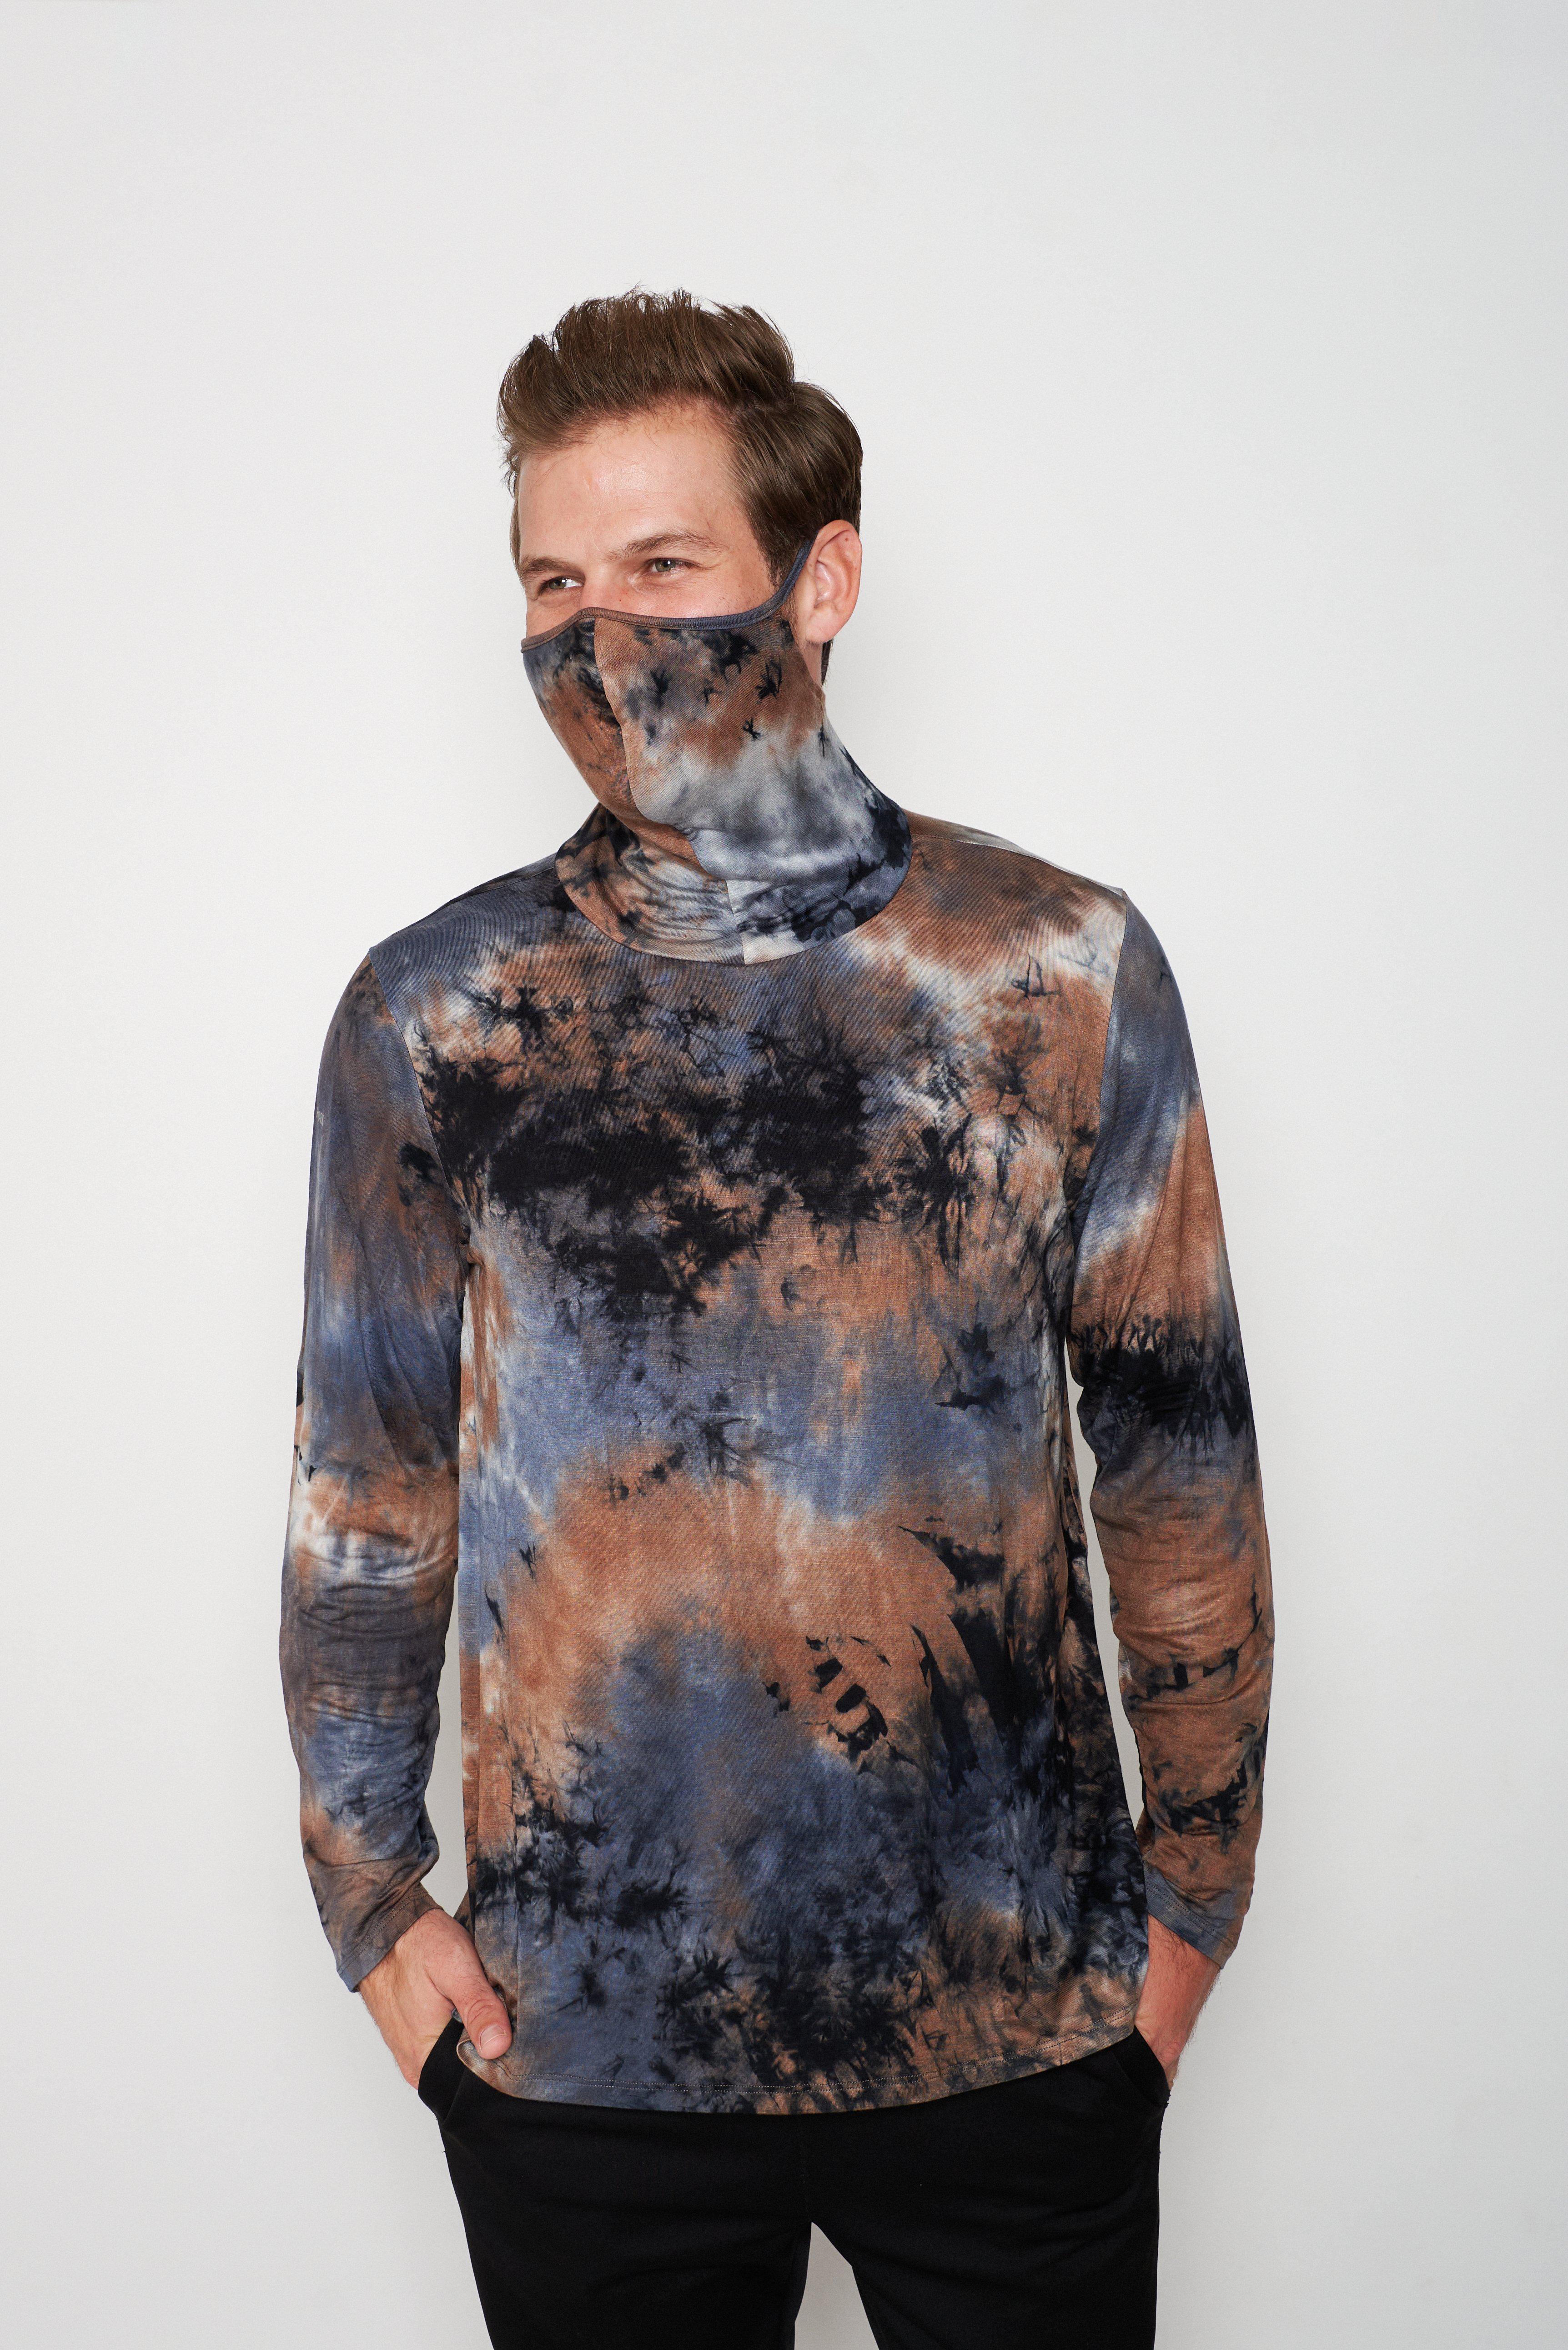 Adult Long Sleeve Blue Gray Black Brown Tie-dye #36 Shmask™ Earloop Face Mask for Kids and Adults